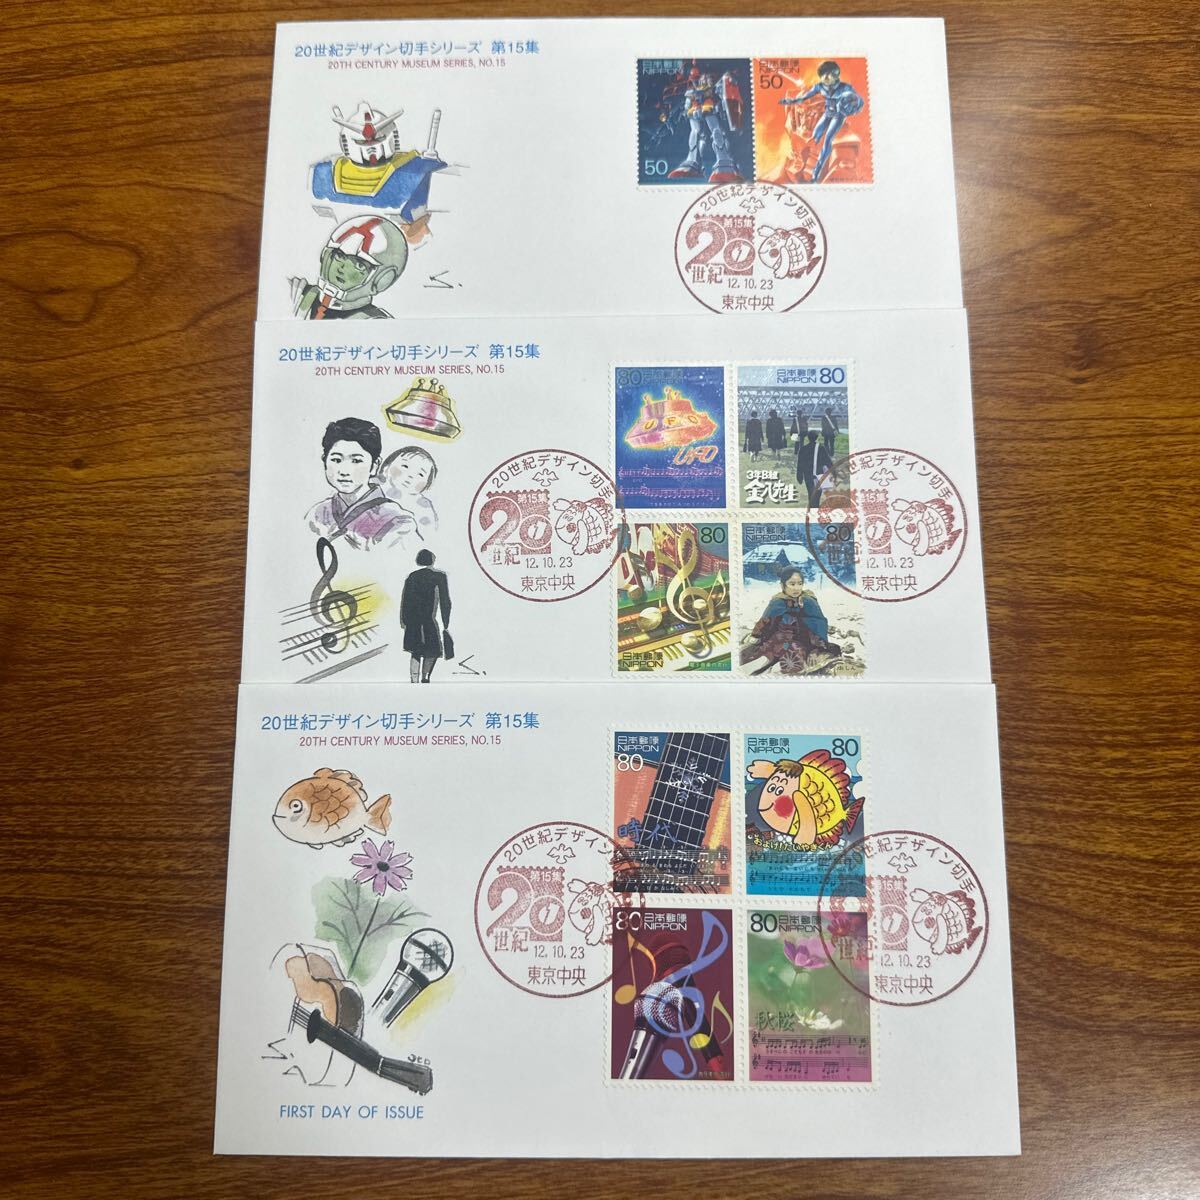  First Day Cover 20 century design stamp series no. 15 compilation Heisei era 12 year issue memory seal 